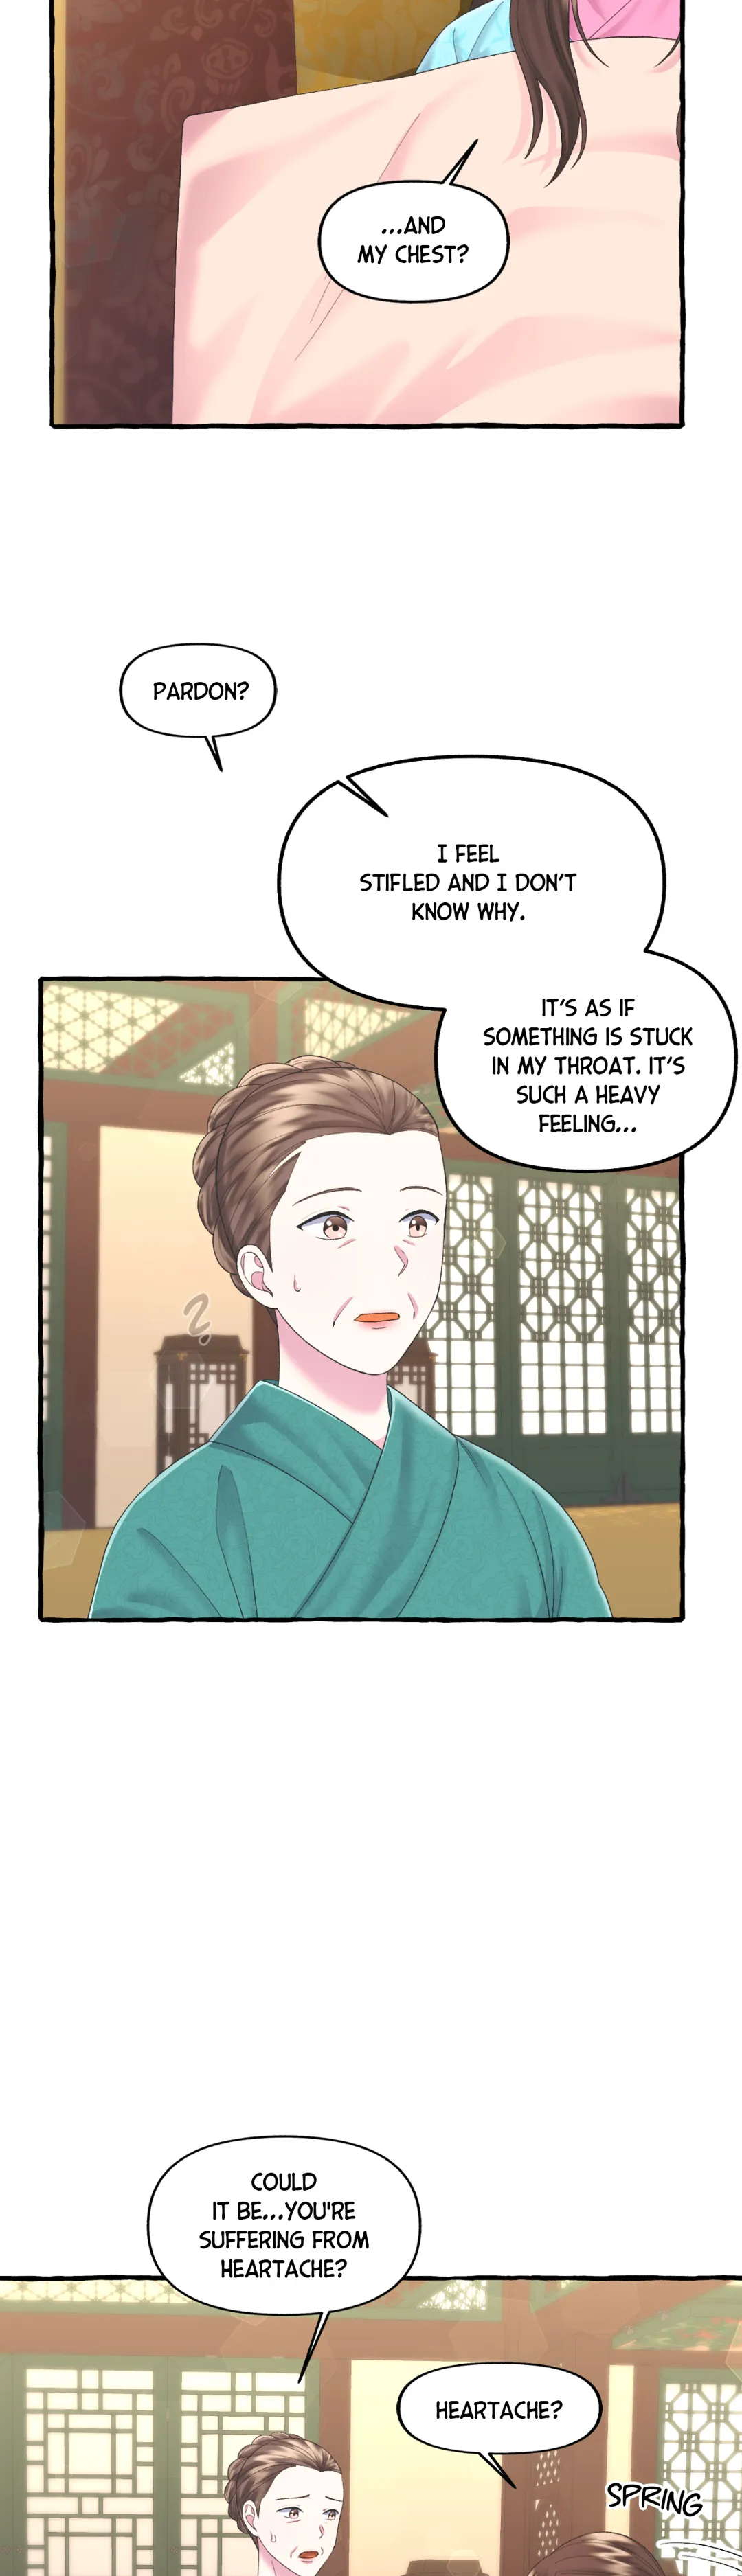 Cheer Up, Your Highness! chapter 24